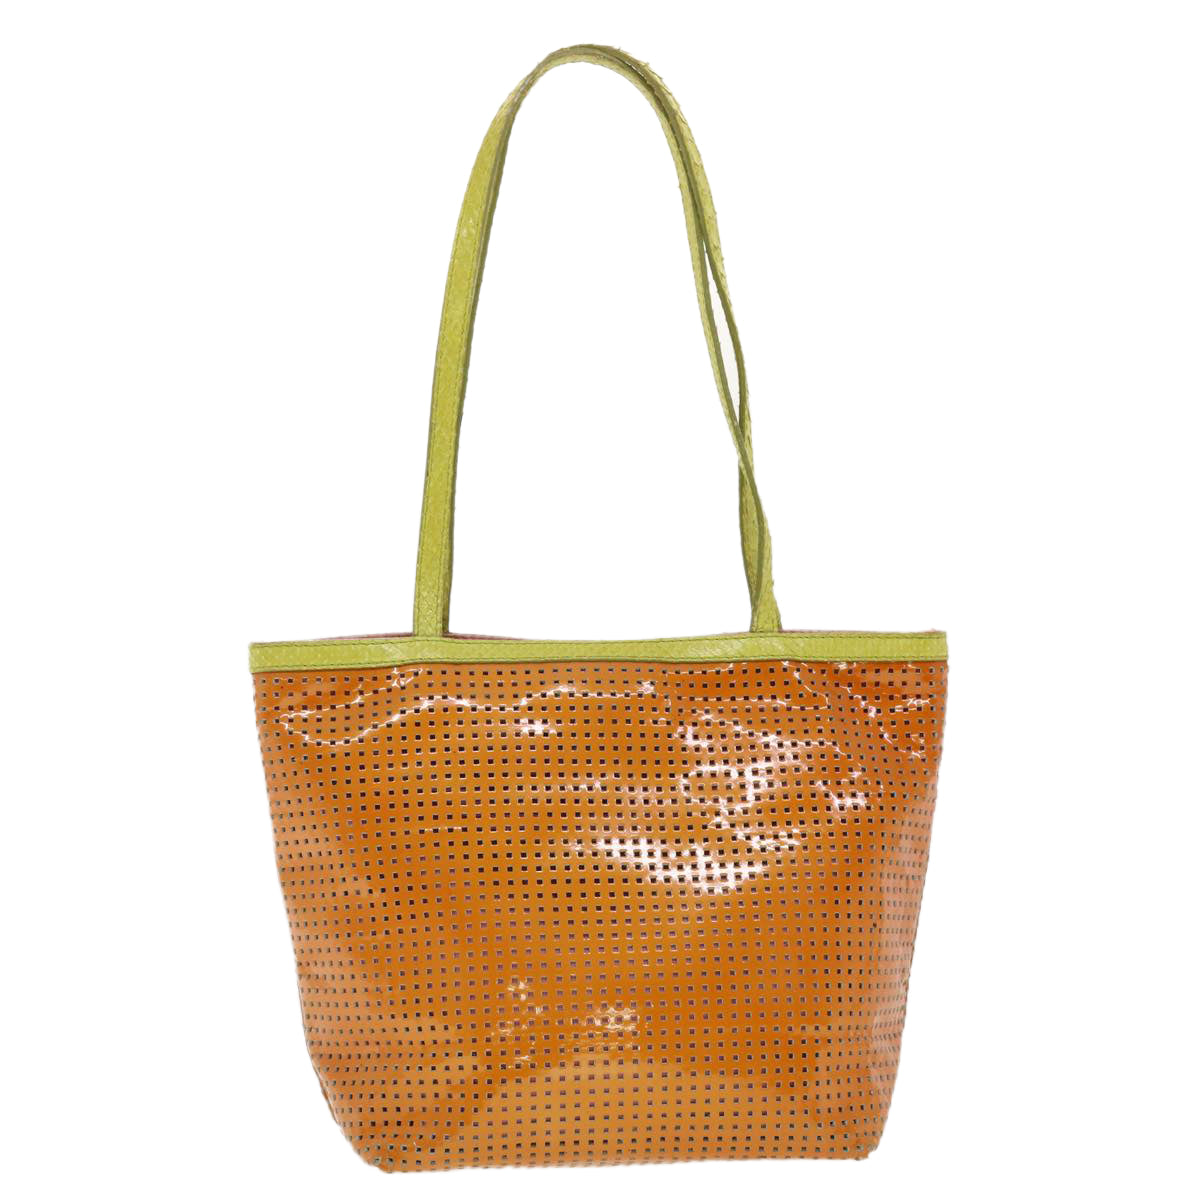 FENDI punching Tote Bag Patent leather Orange 2813-26731-008 Auth rd4723 - 0